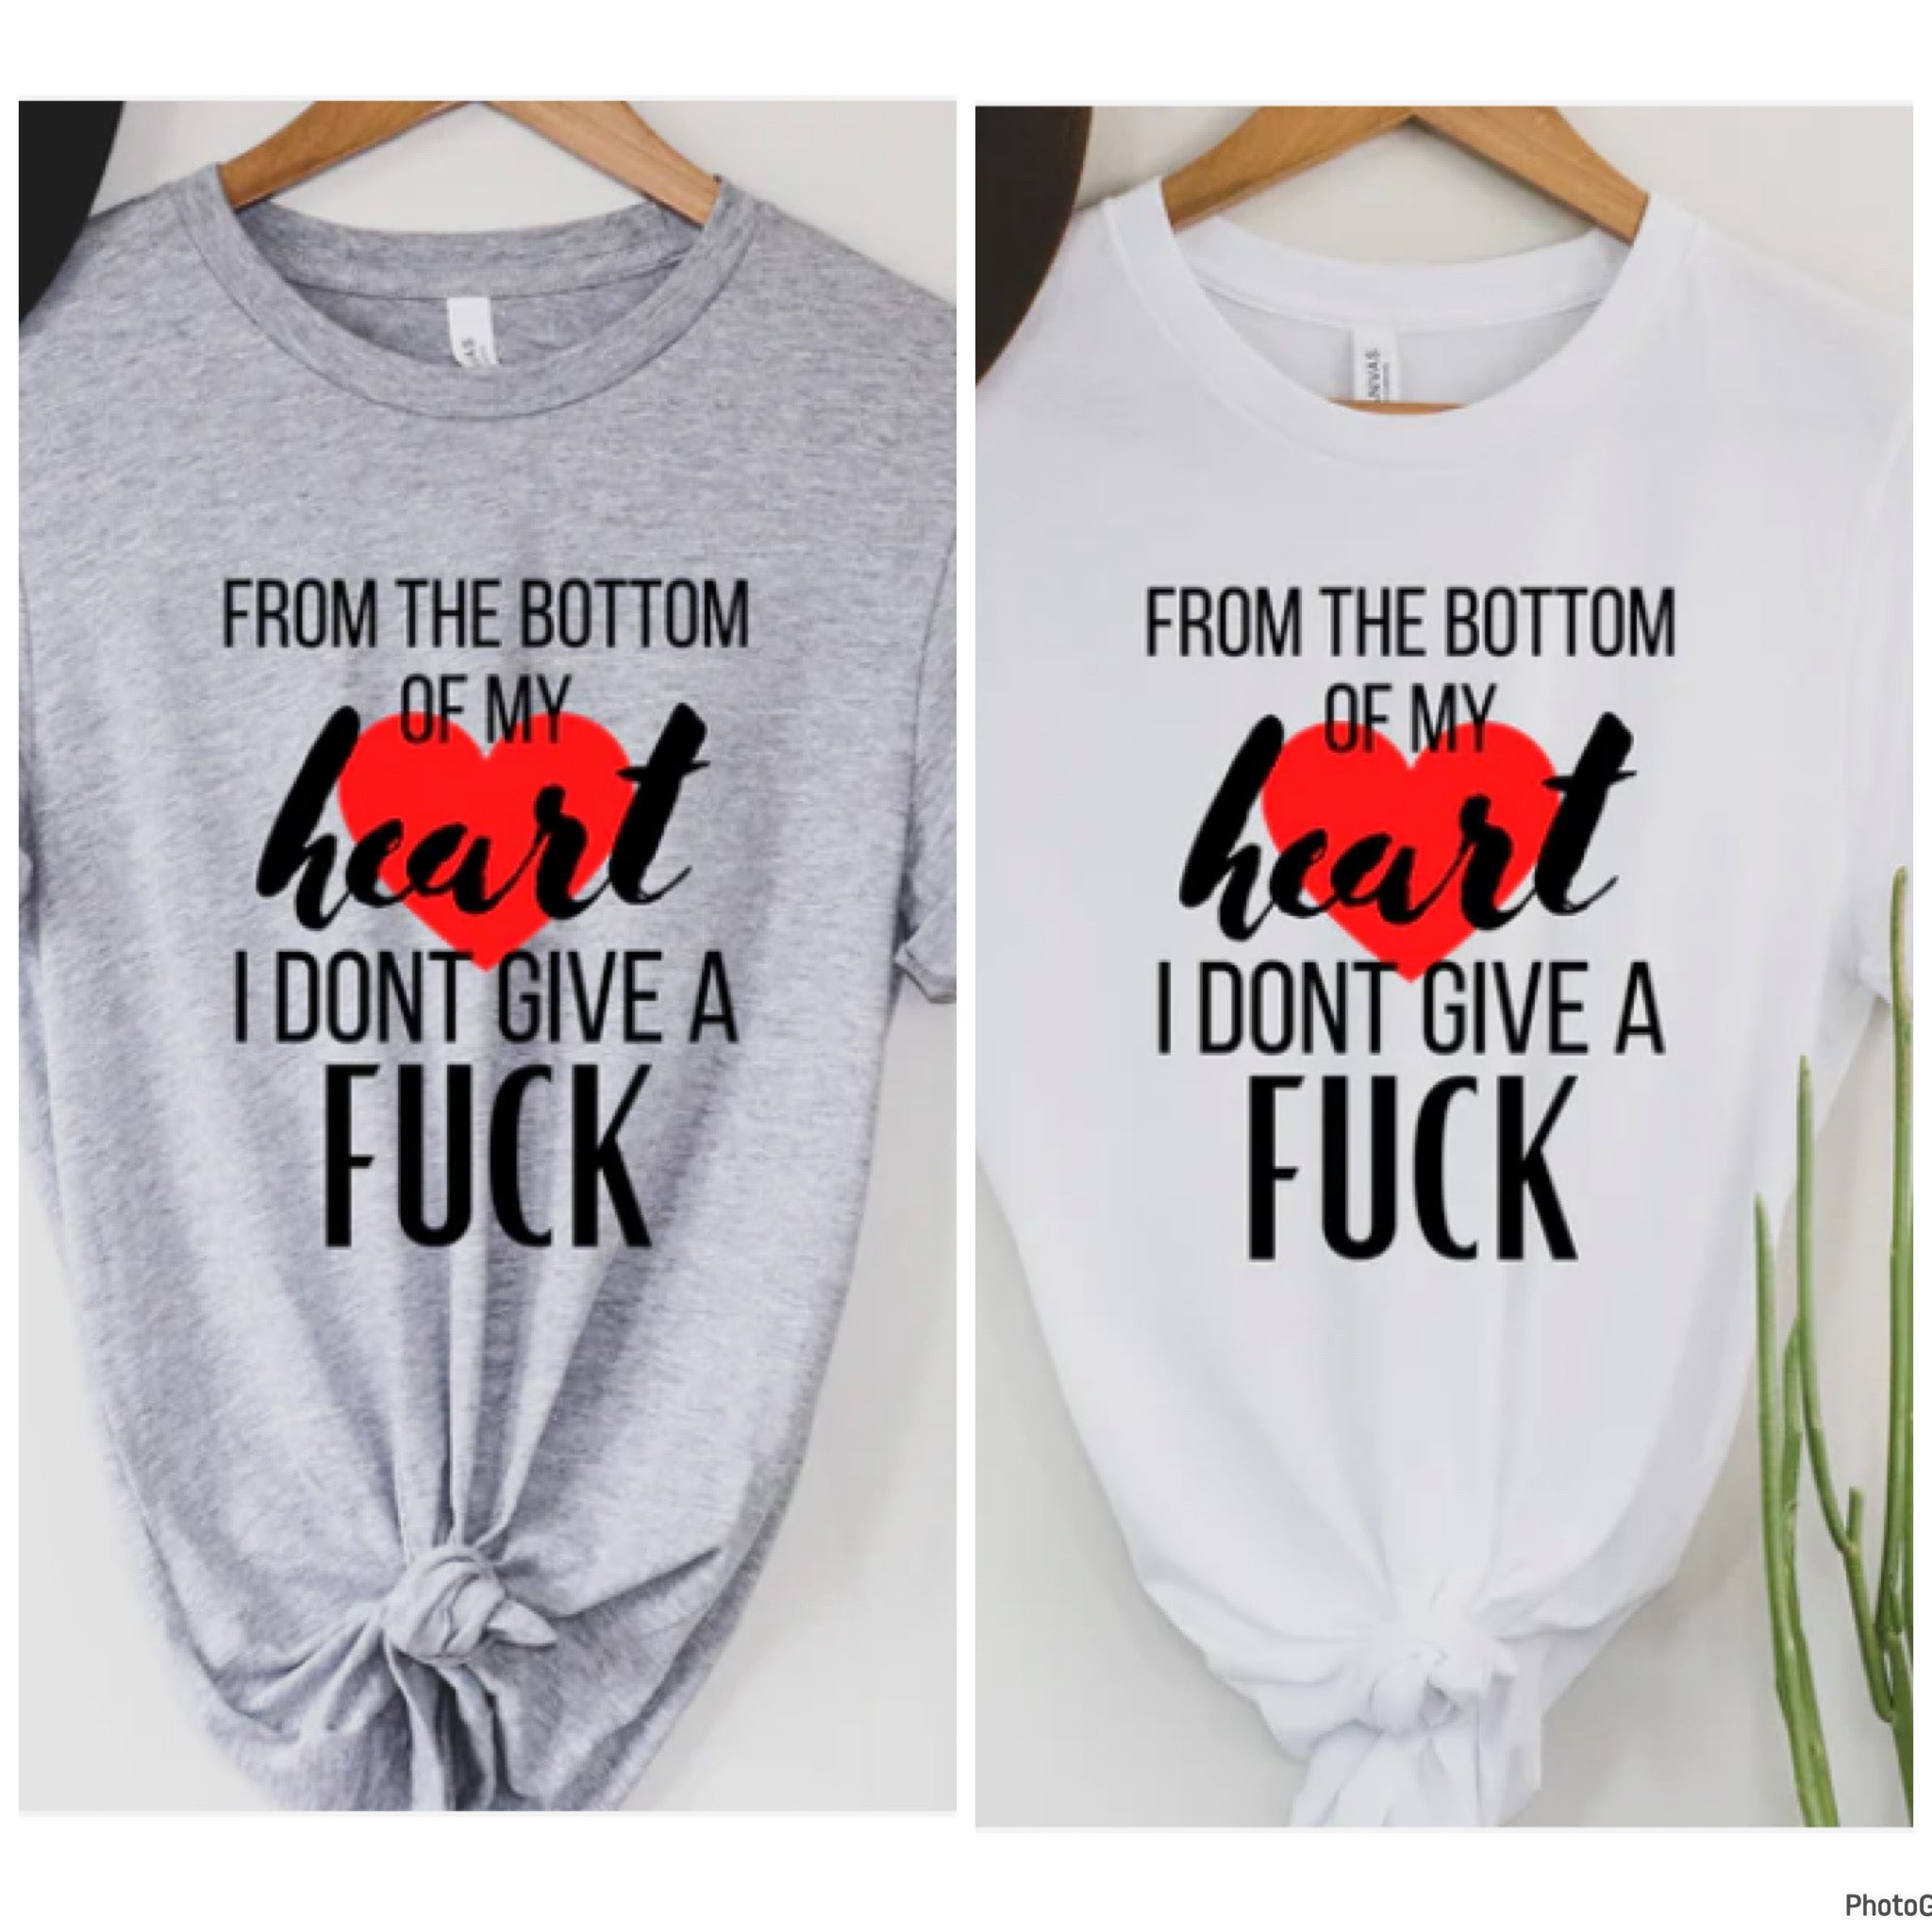 From the Bottom of my Heart tee